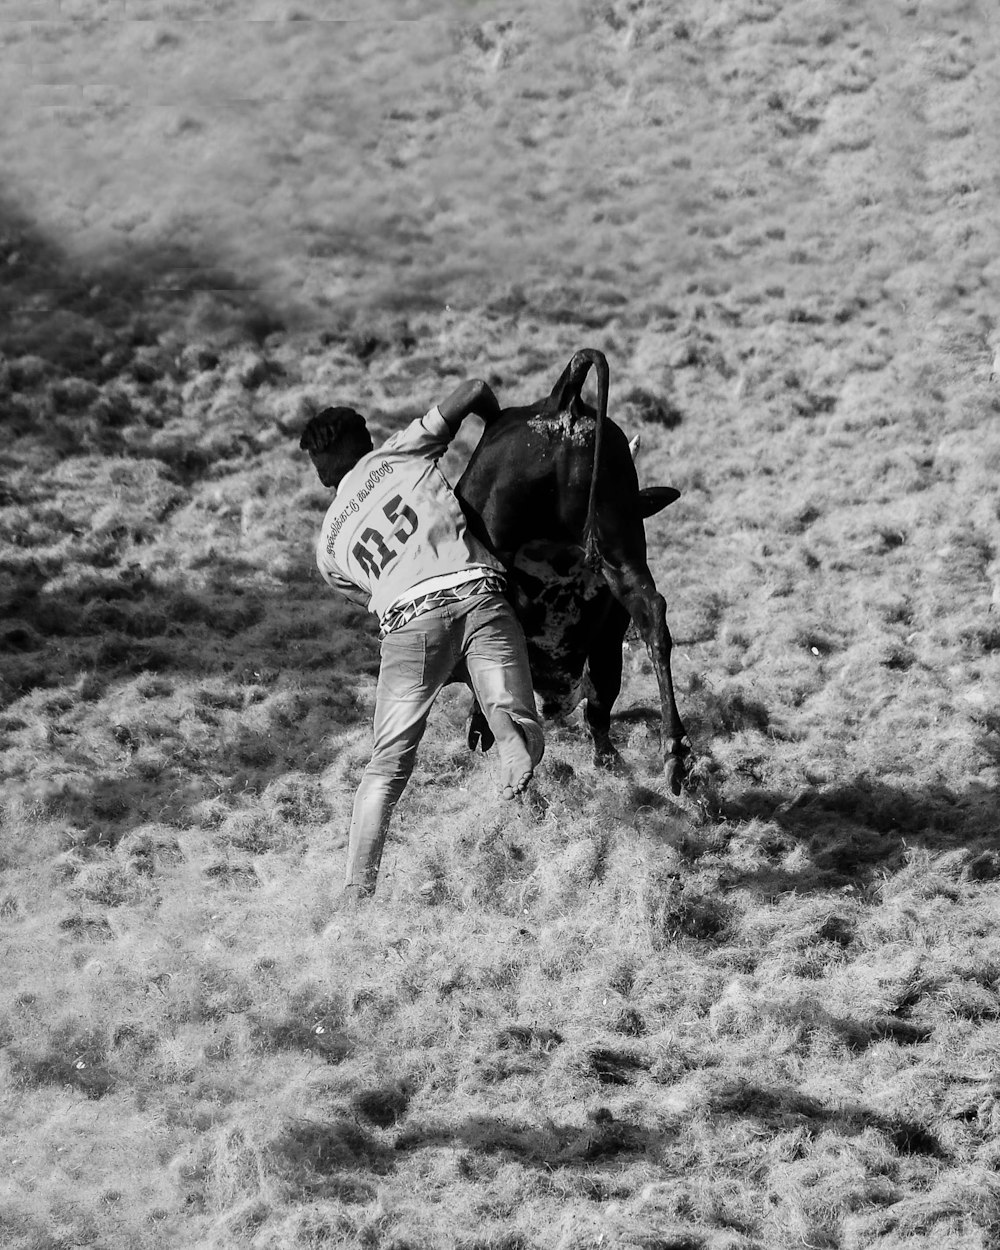 a black and white photo of a man plowing a field with a horse